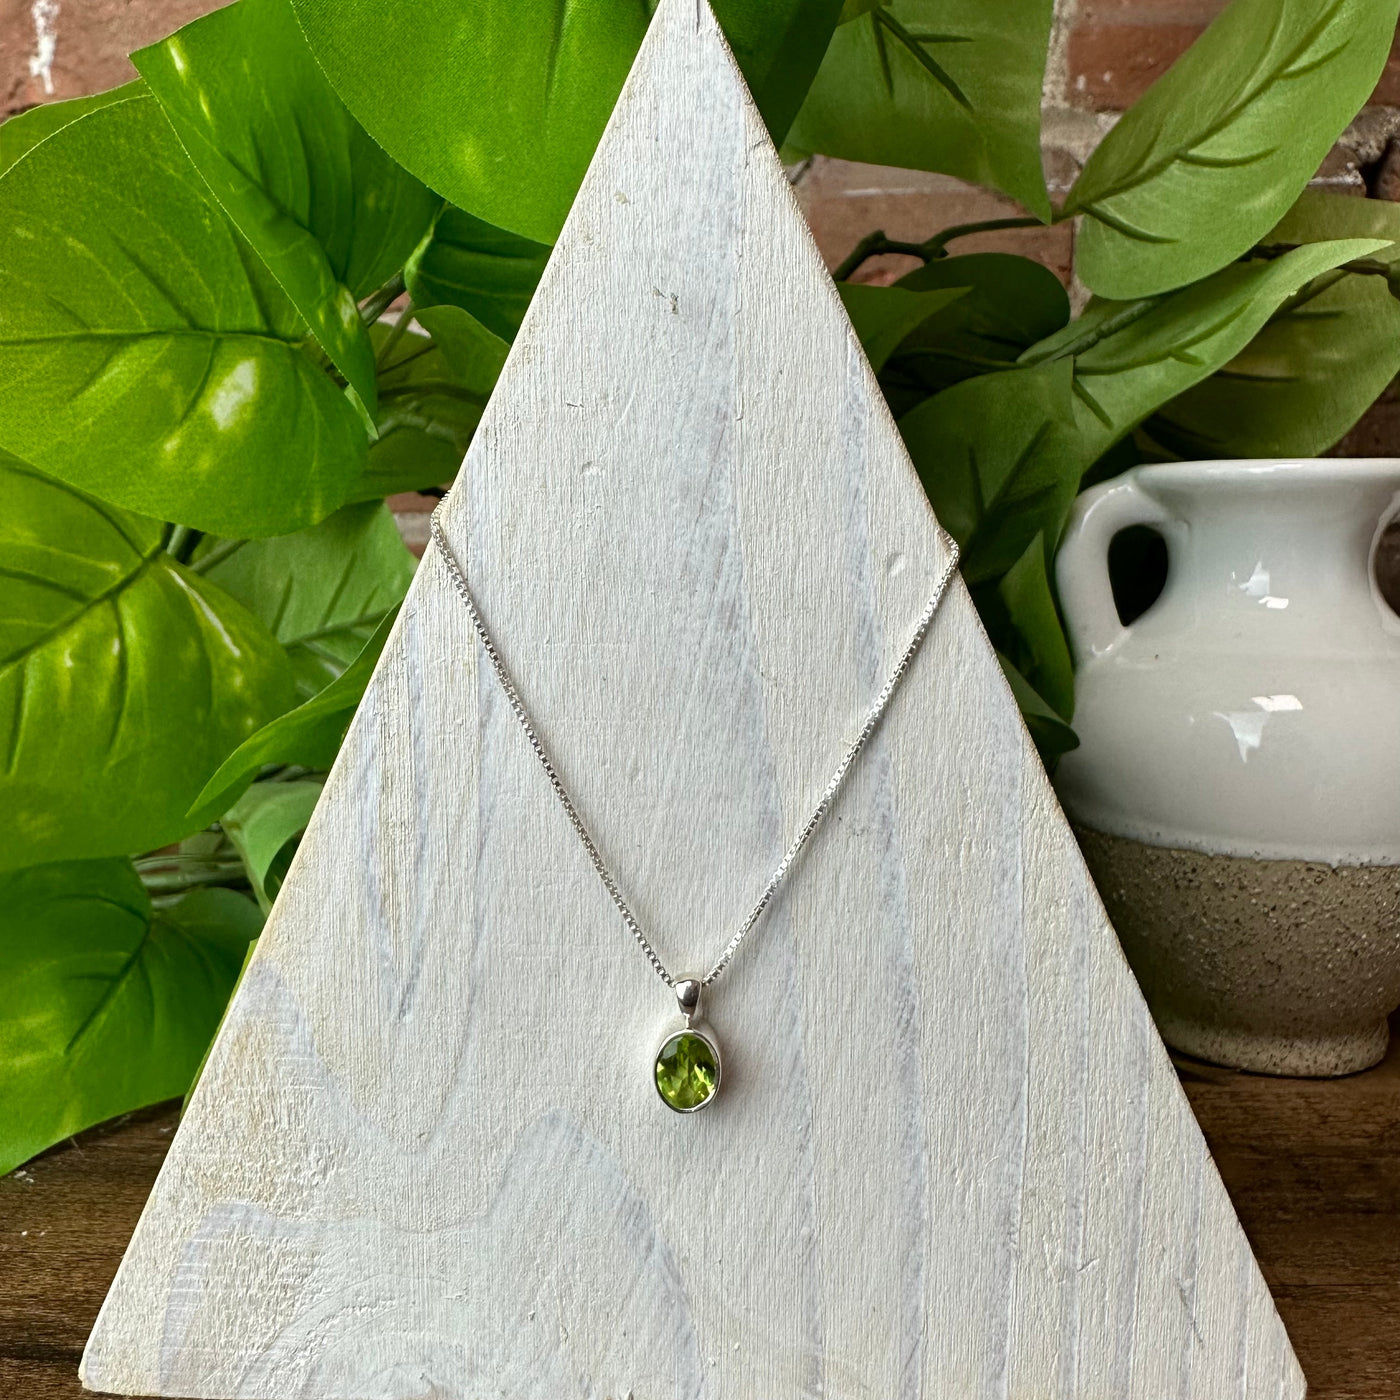 Peridot Faceted Pendant Necklace with 16-18" Adjustable Sterling Silver Chain (Assorted Shapes)